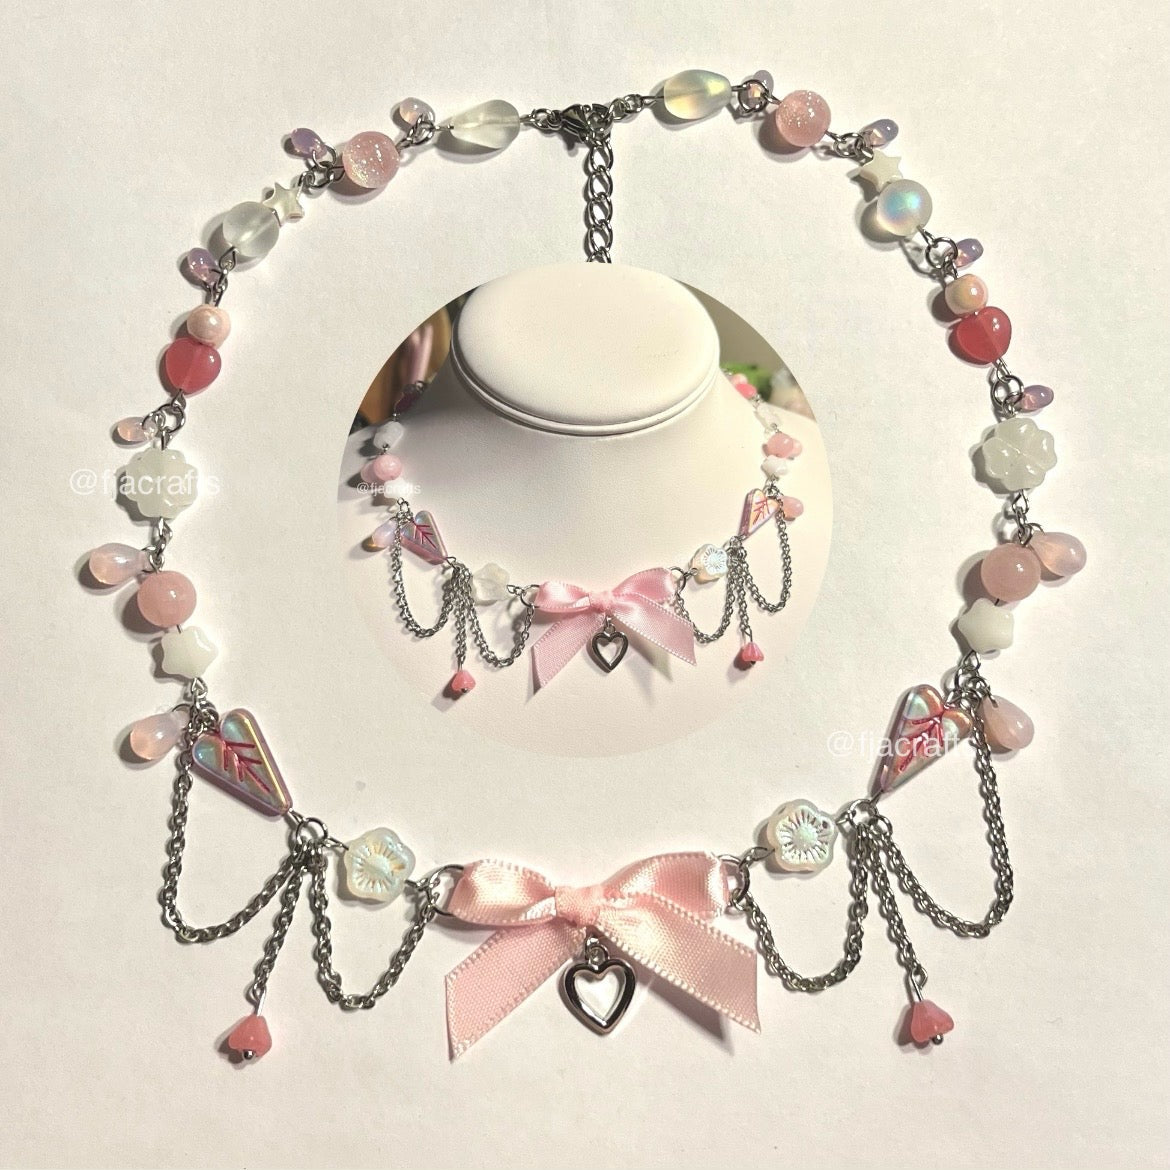 Clutter Necklace | heart pink bows silver cute coquette chains | Girlhood Magazine Collab FJA Crafts